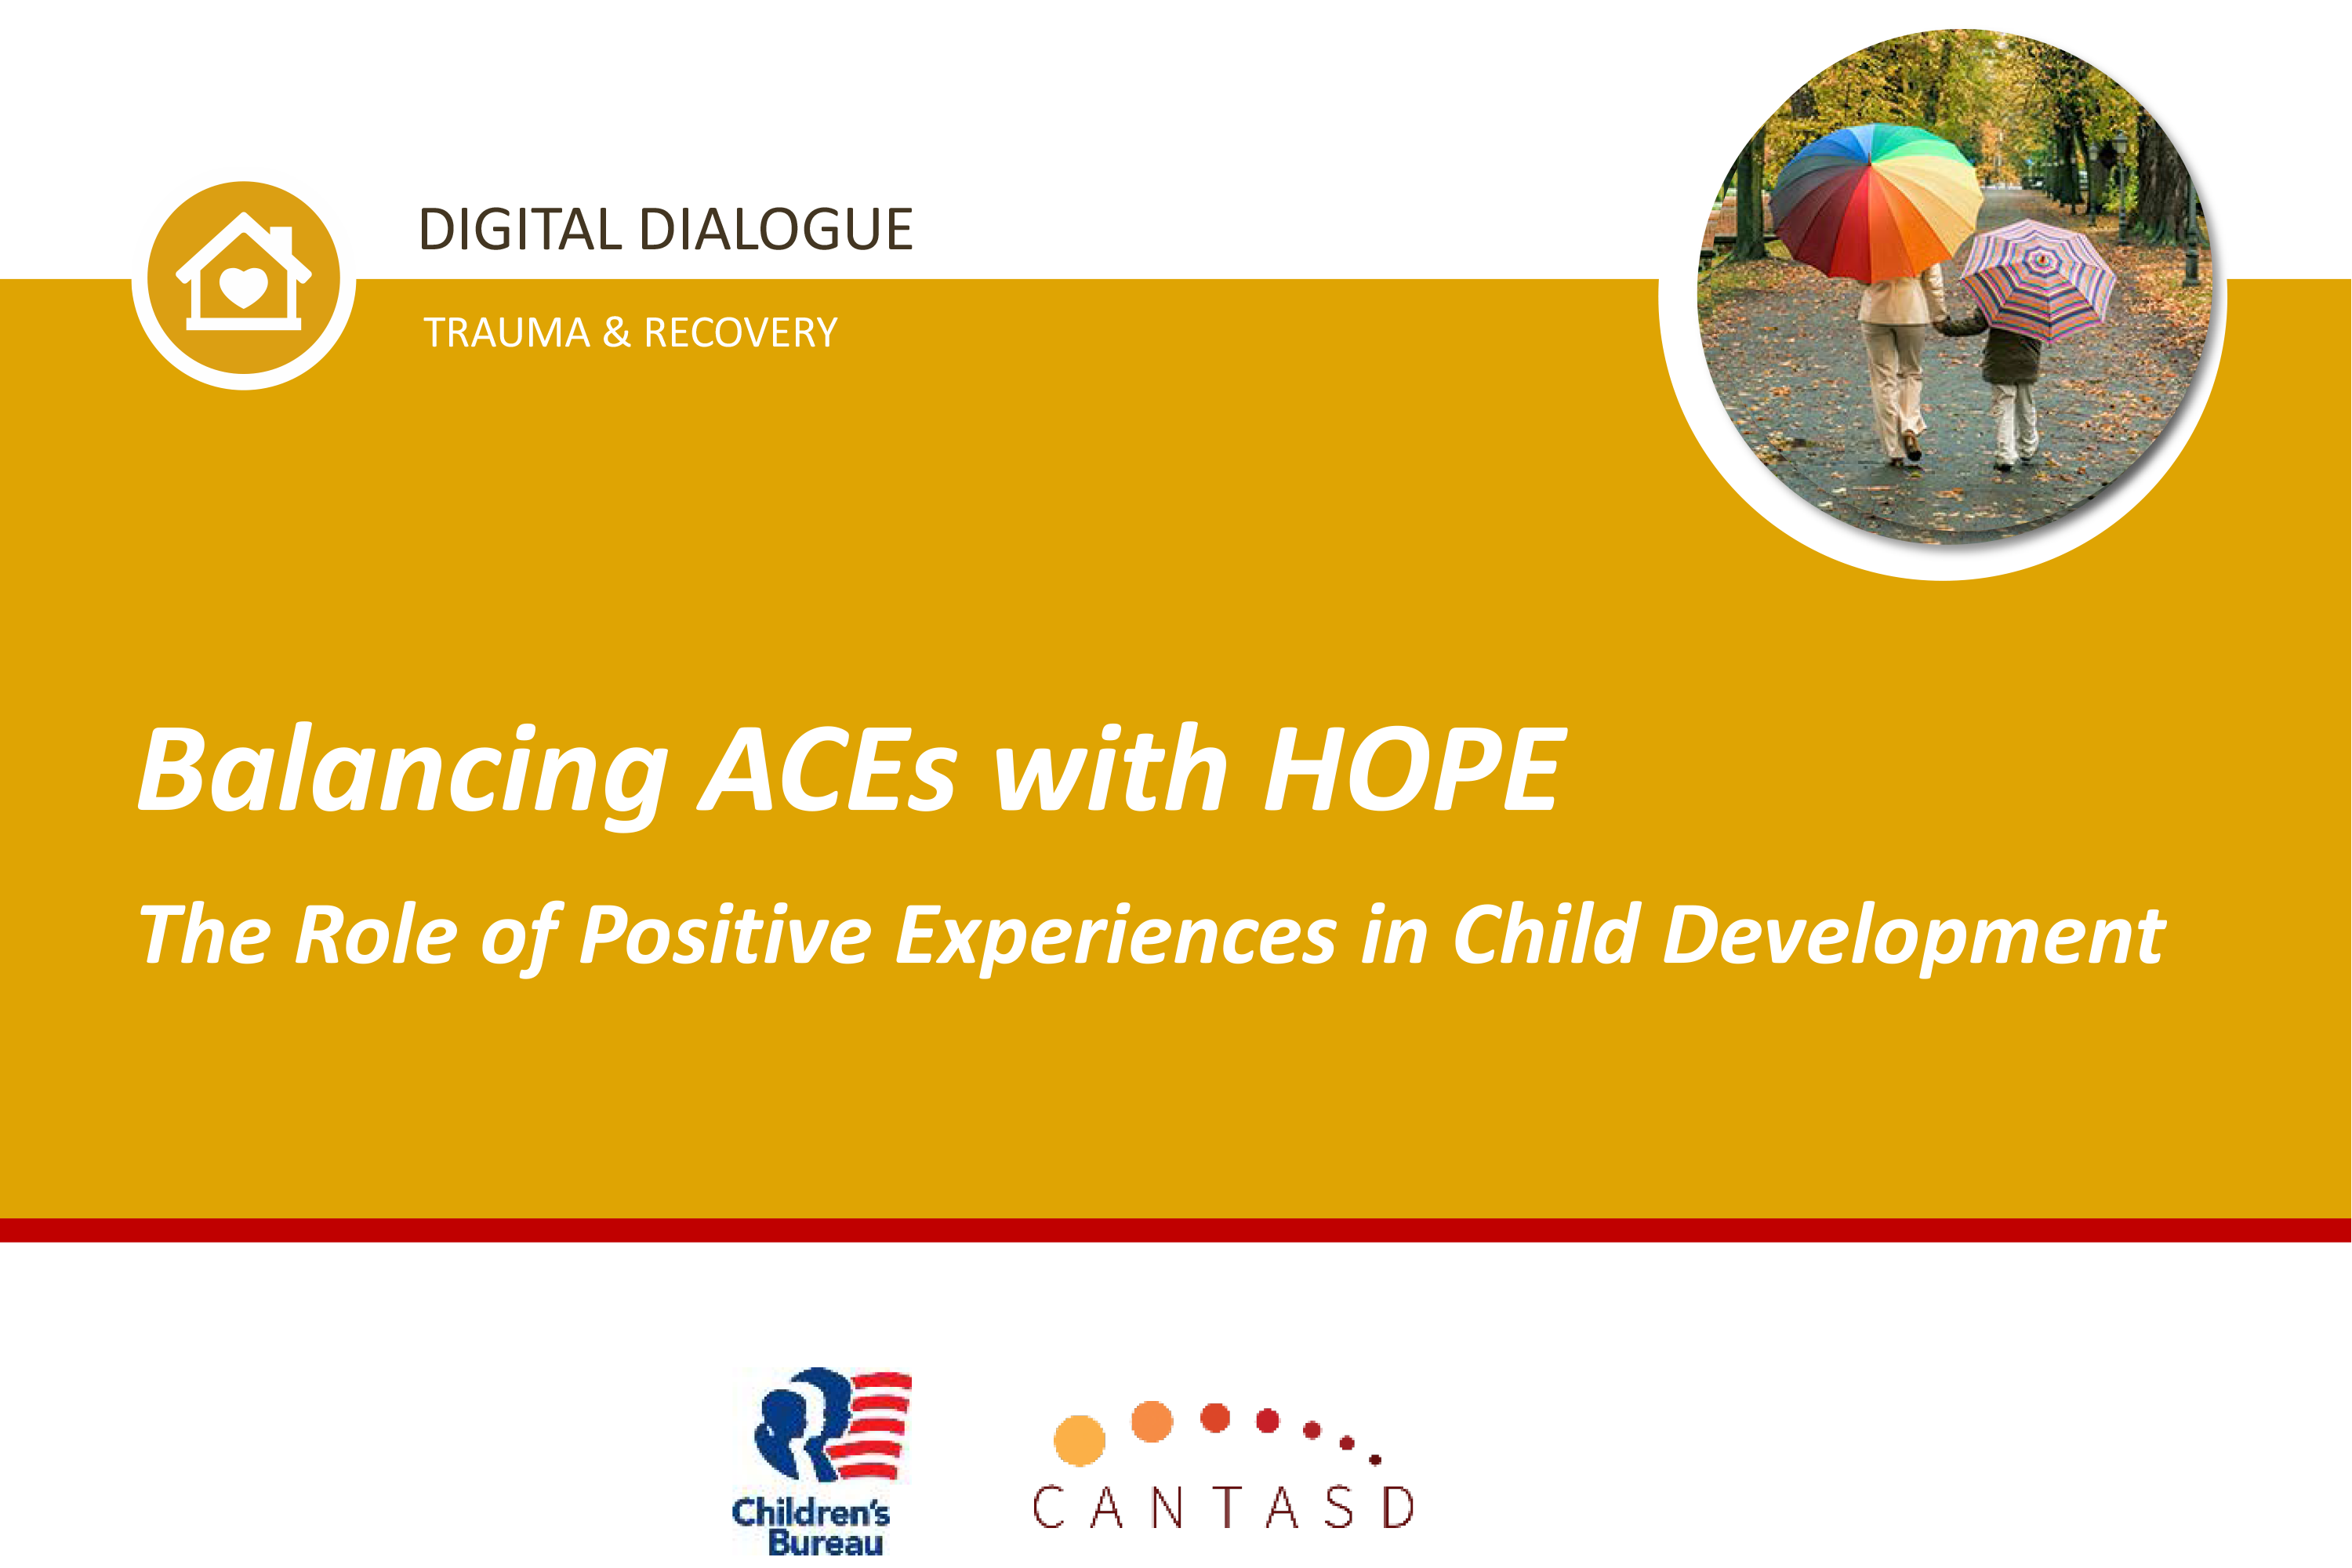 Balancing ACEs with HOPE - This link opens in a new window.